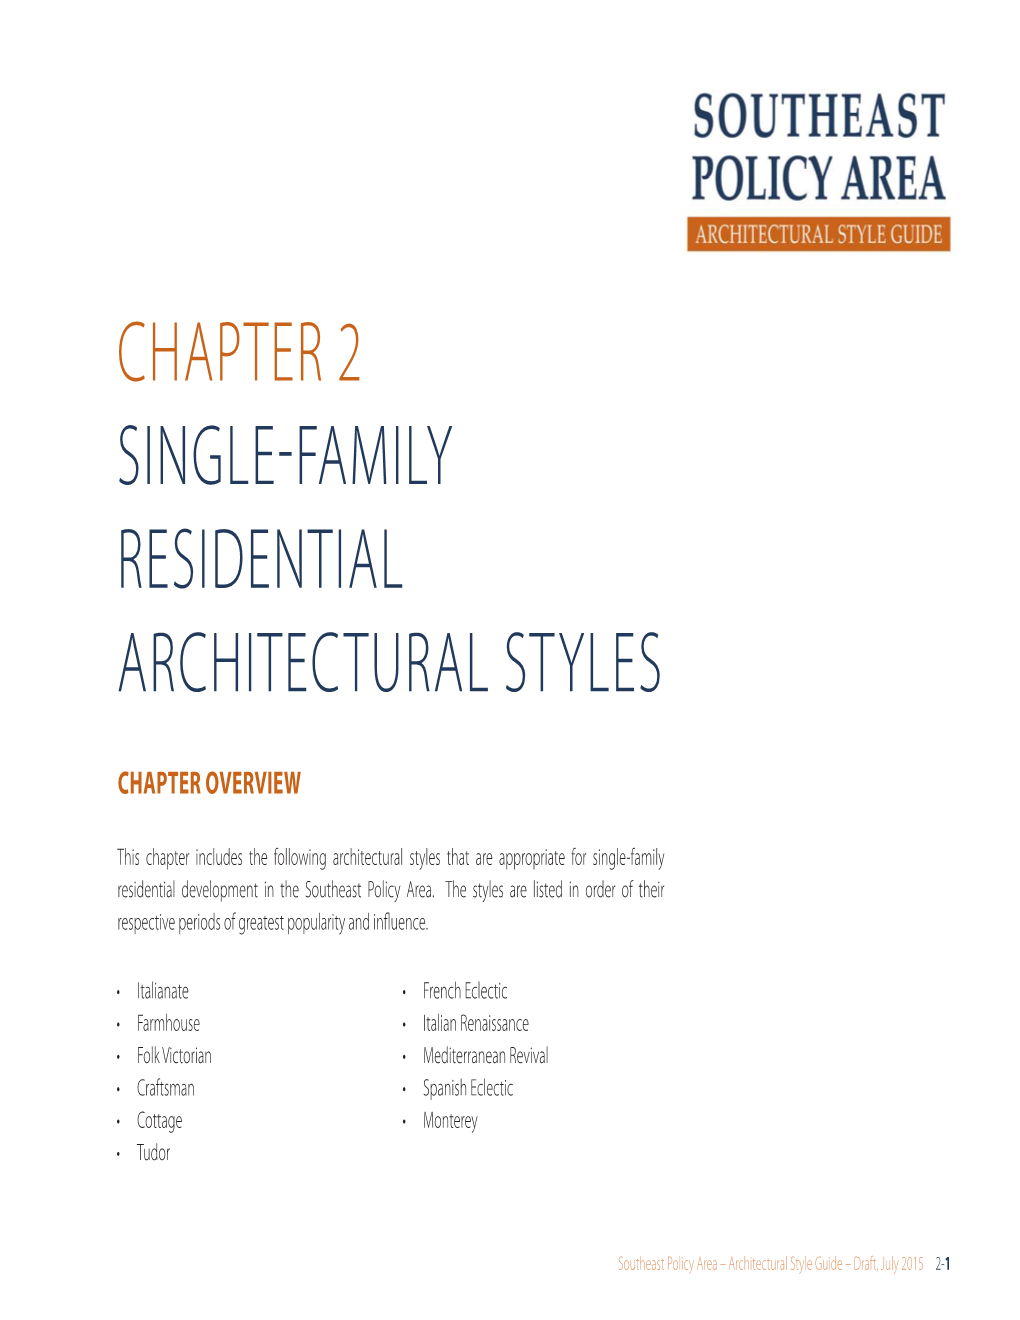 Chapter 2 Single-Family Residential Architectural Styles